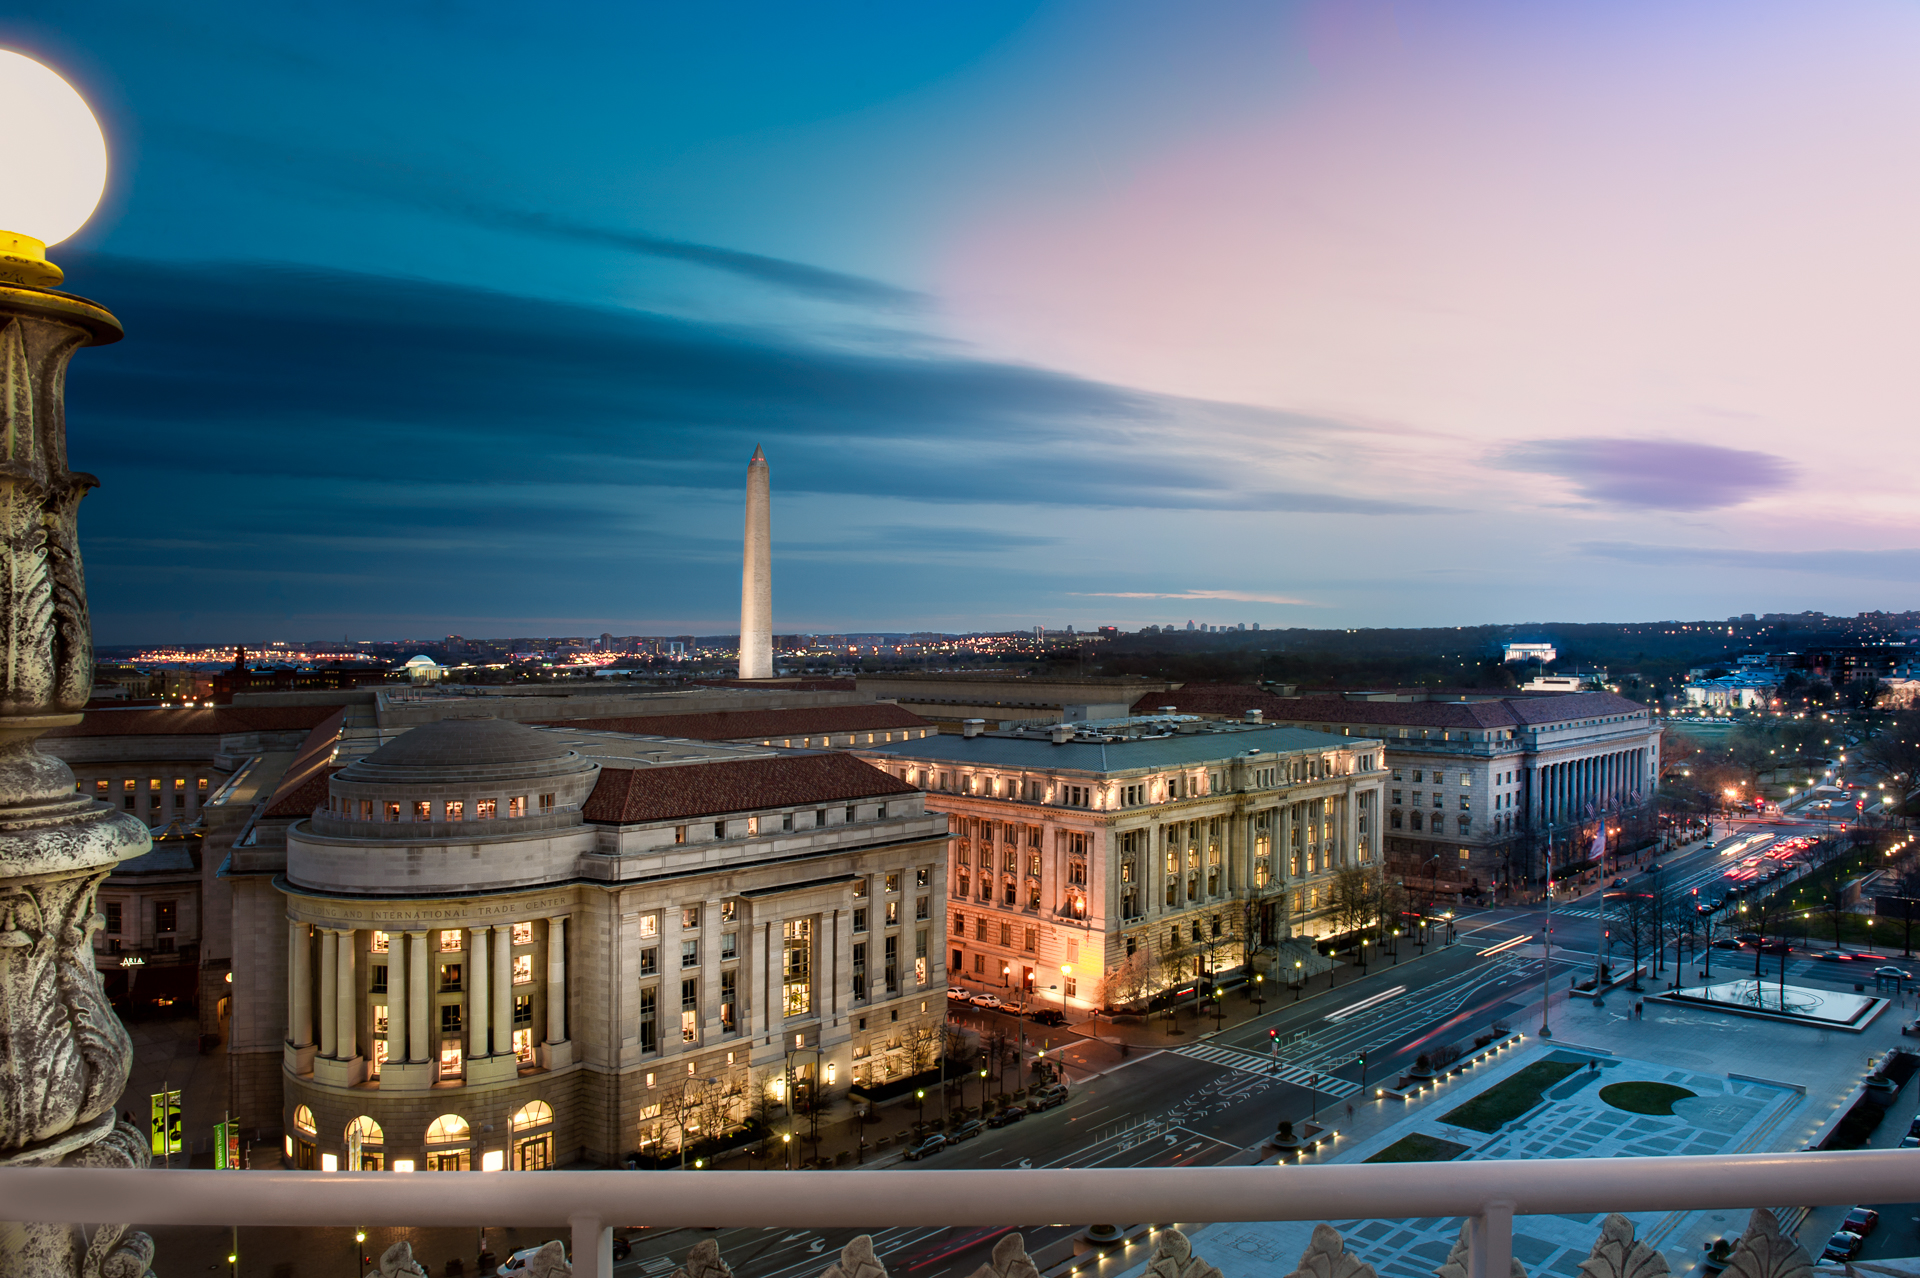 Sunset view from The Warner Theater Building over Freedom Square, Pennsylvania Avenue, The Reagan Building and The Washington Monument